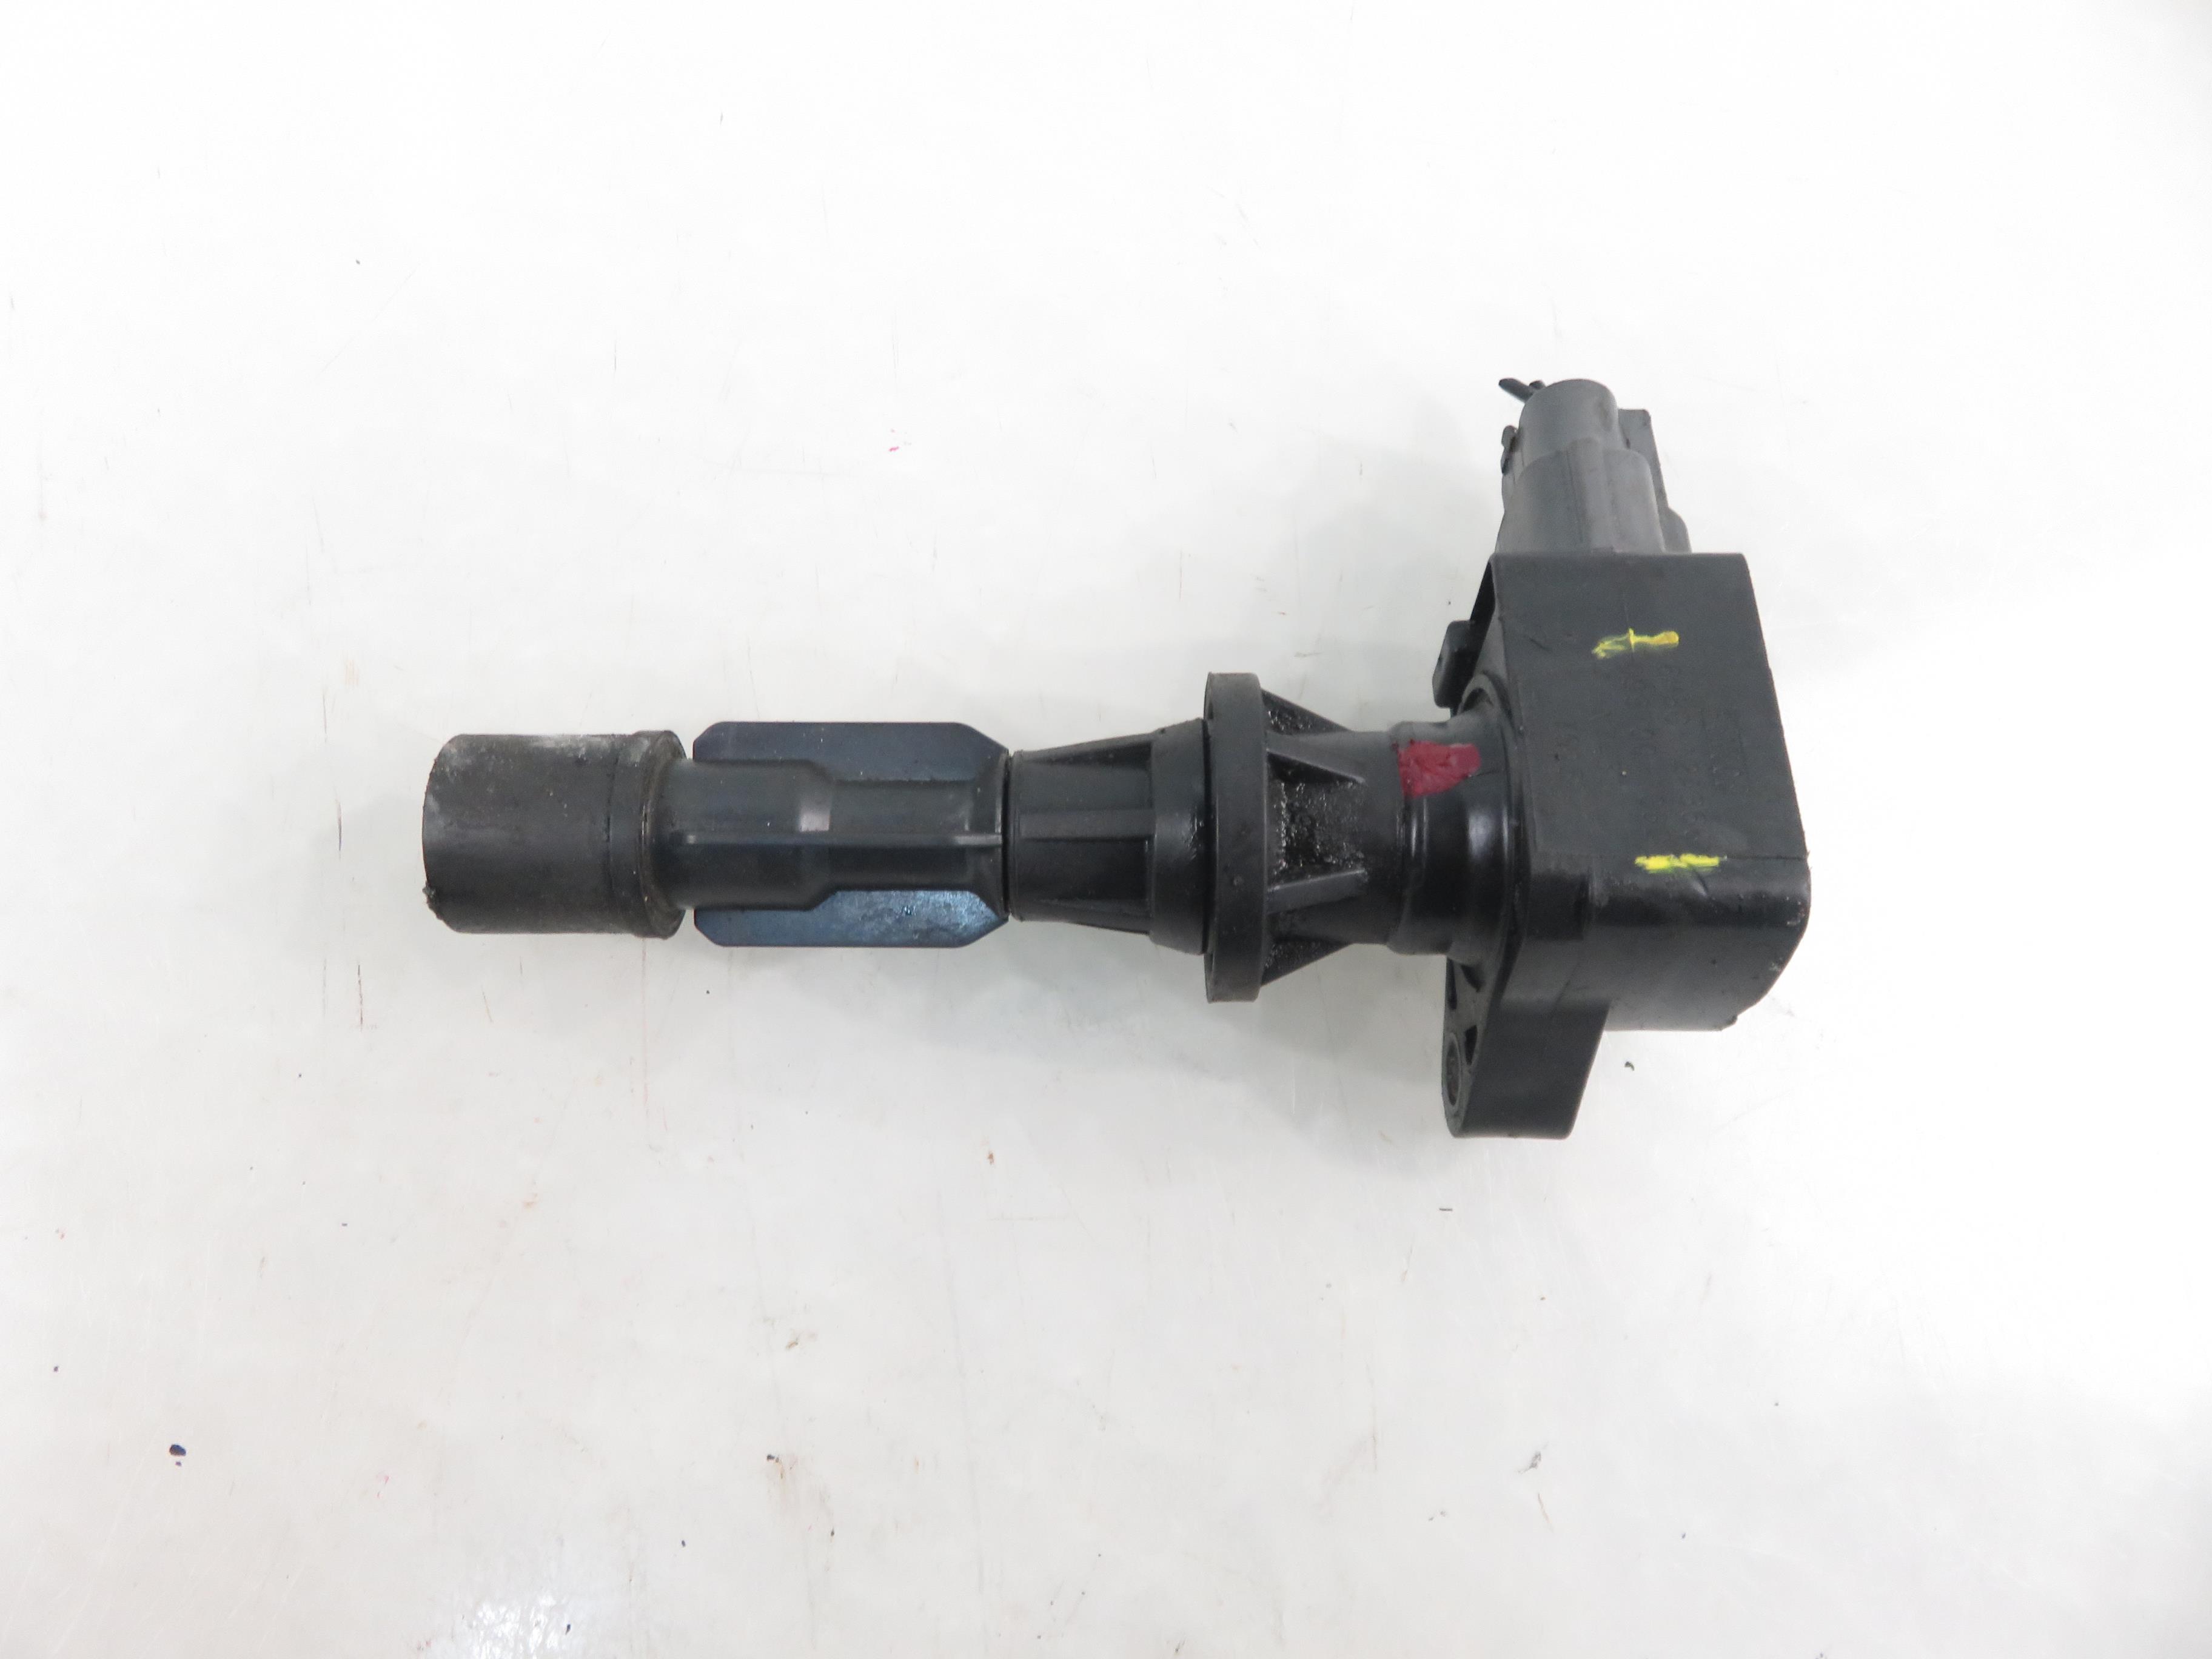 MAZDA 6 GG (2002-2007) High Voltage Ignition Coil 0997001062, 6M8G12A366 22981972